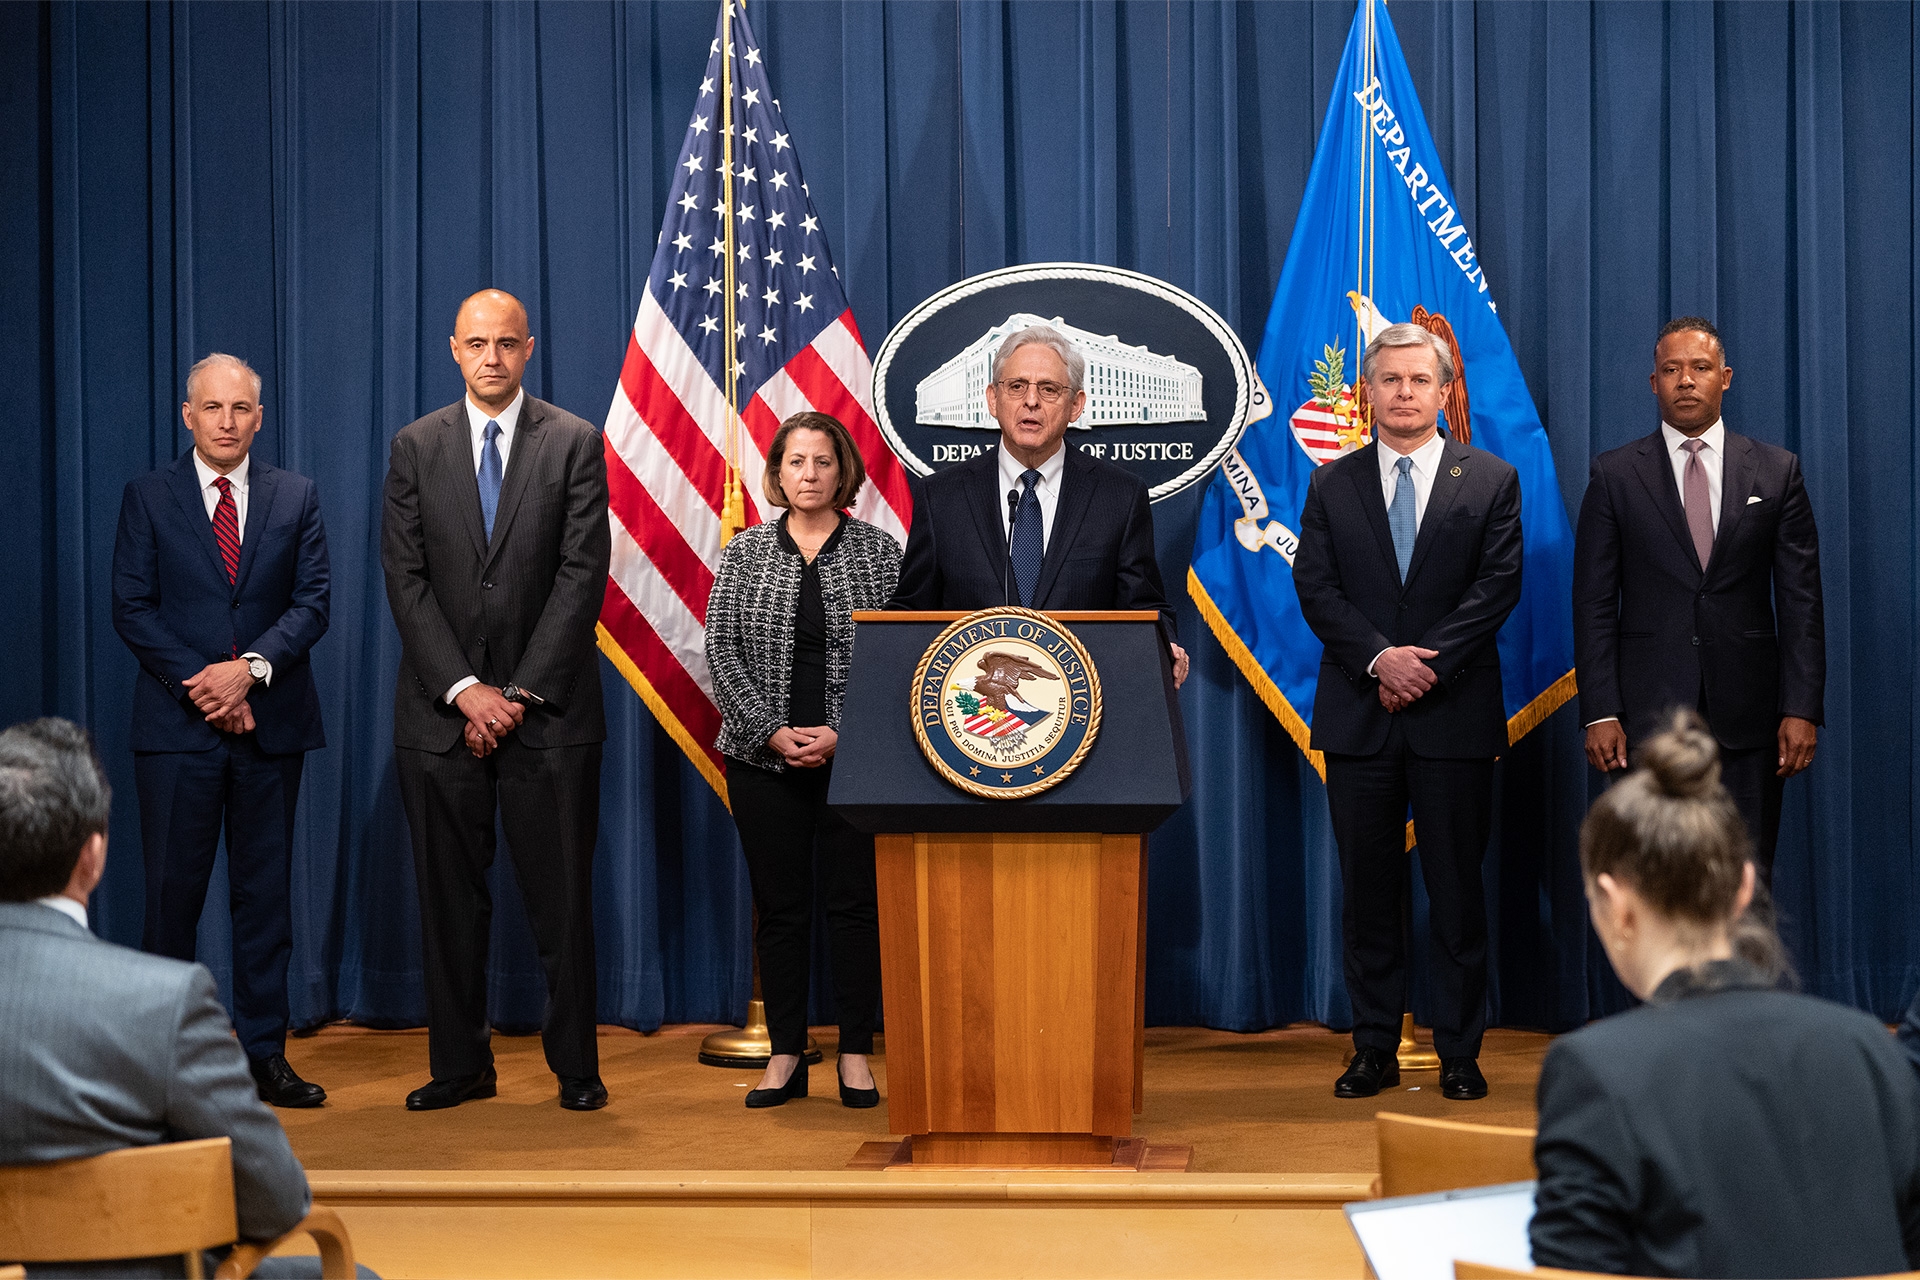 Attorney General Garland delivers remarks from a podium. Behind him stand (from left to right) Assistant Attorney General Olsen, U.S. Attorney Graves, Deputy Attorney General Monaco, FBI Director Wray, and Assistant Attorney General Polite